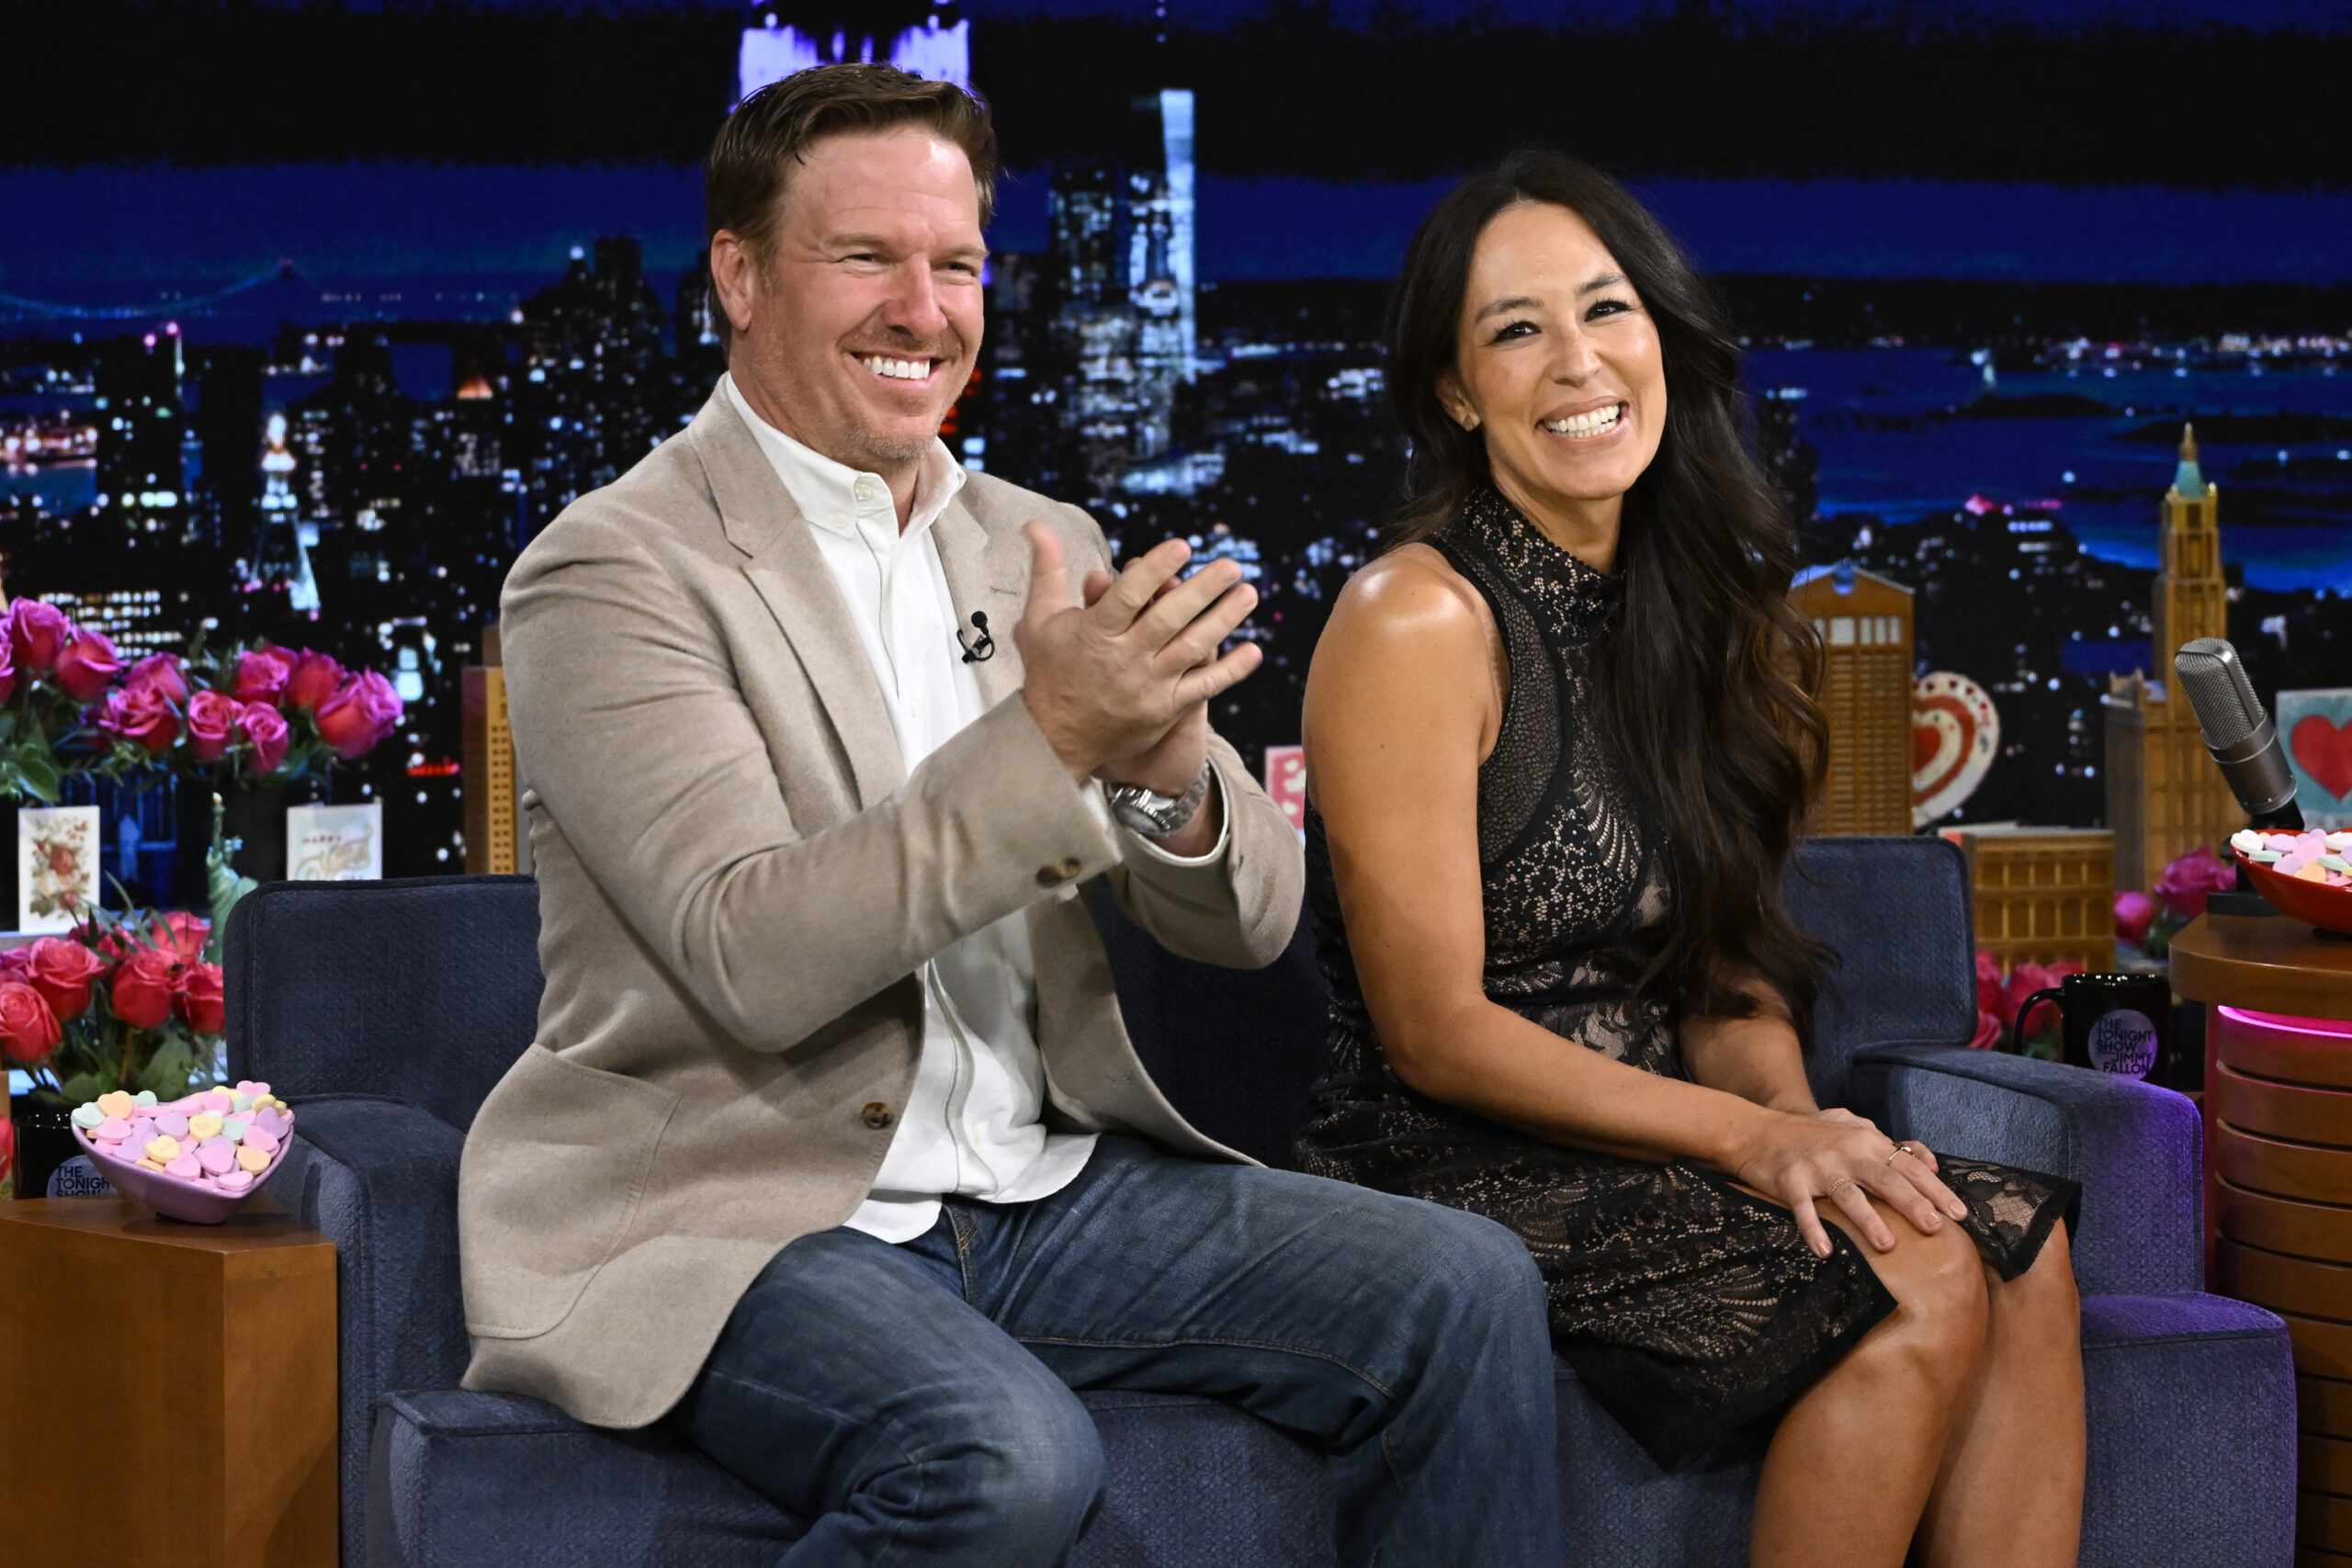 Conservative fans want to know: Will Chip and Joanna Gaines support Target or not?